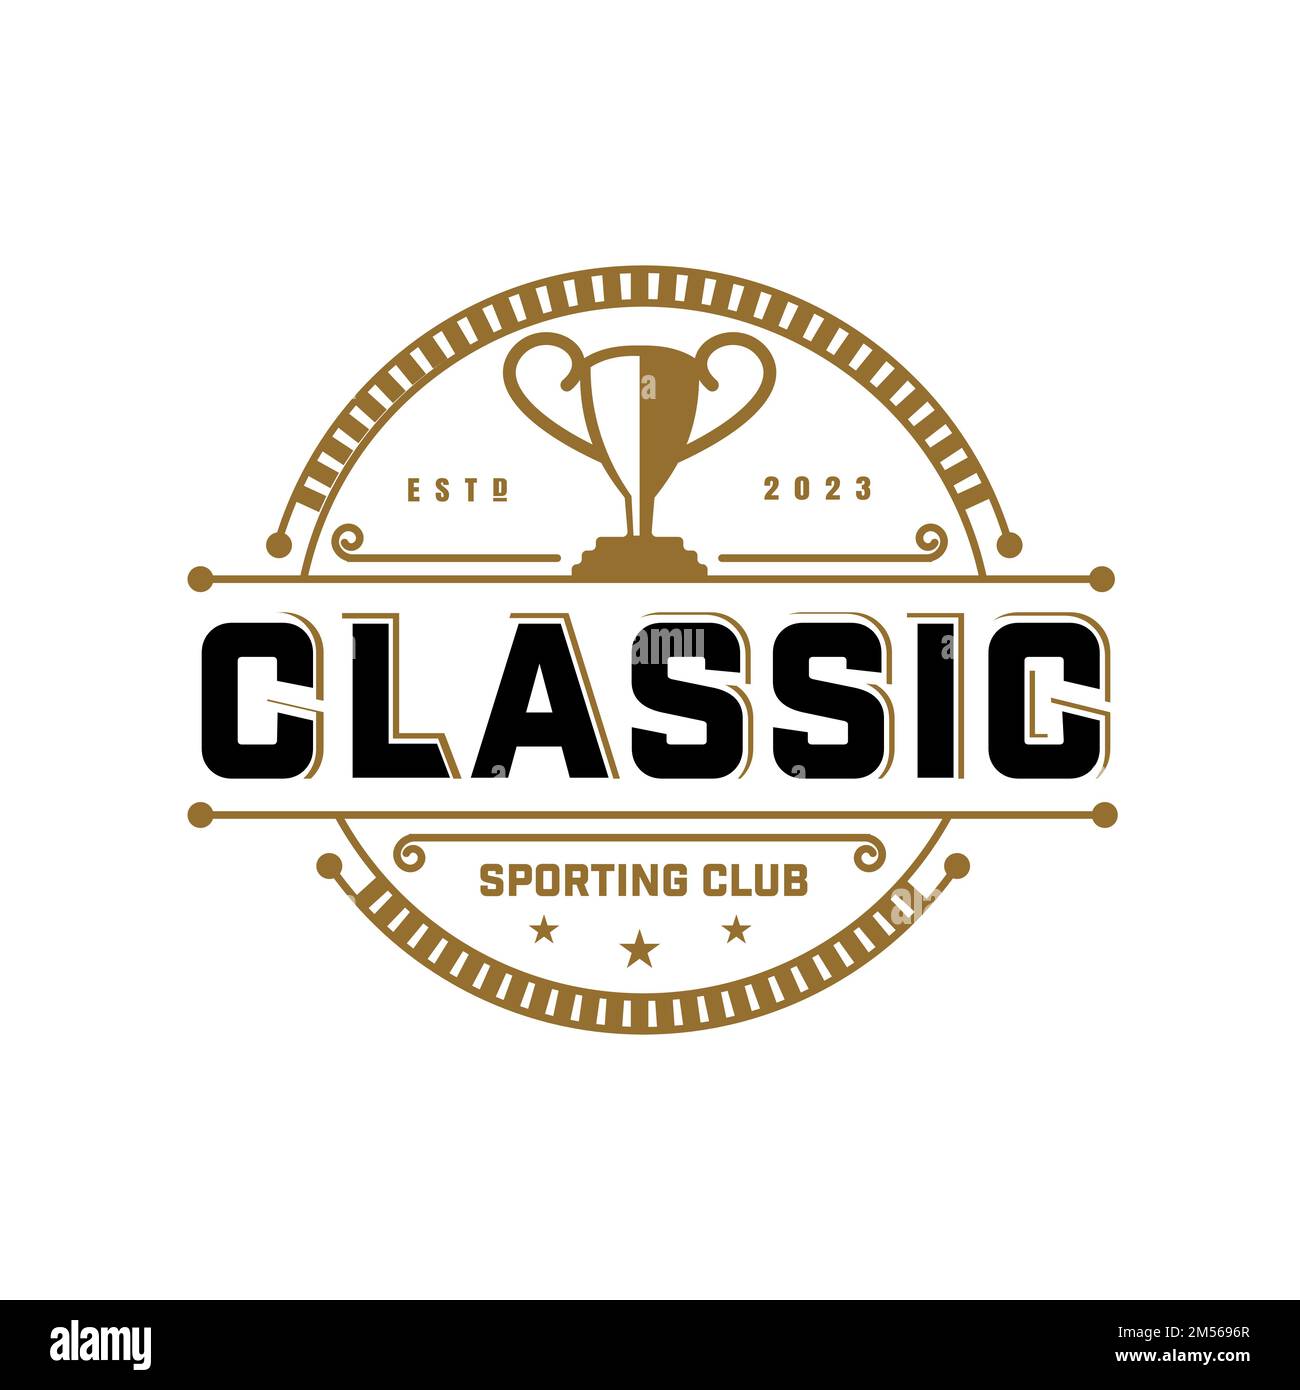 Vintage Retro Champion Trophy Cup Retro Sport design inspiration. Vintage monochrome label, sticker, patch with football trophy silhouette. Stock Vector